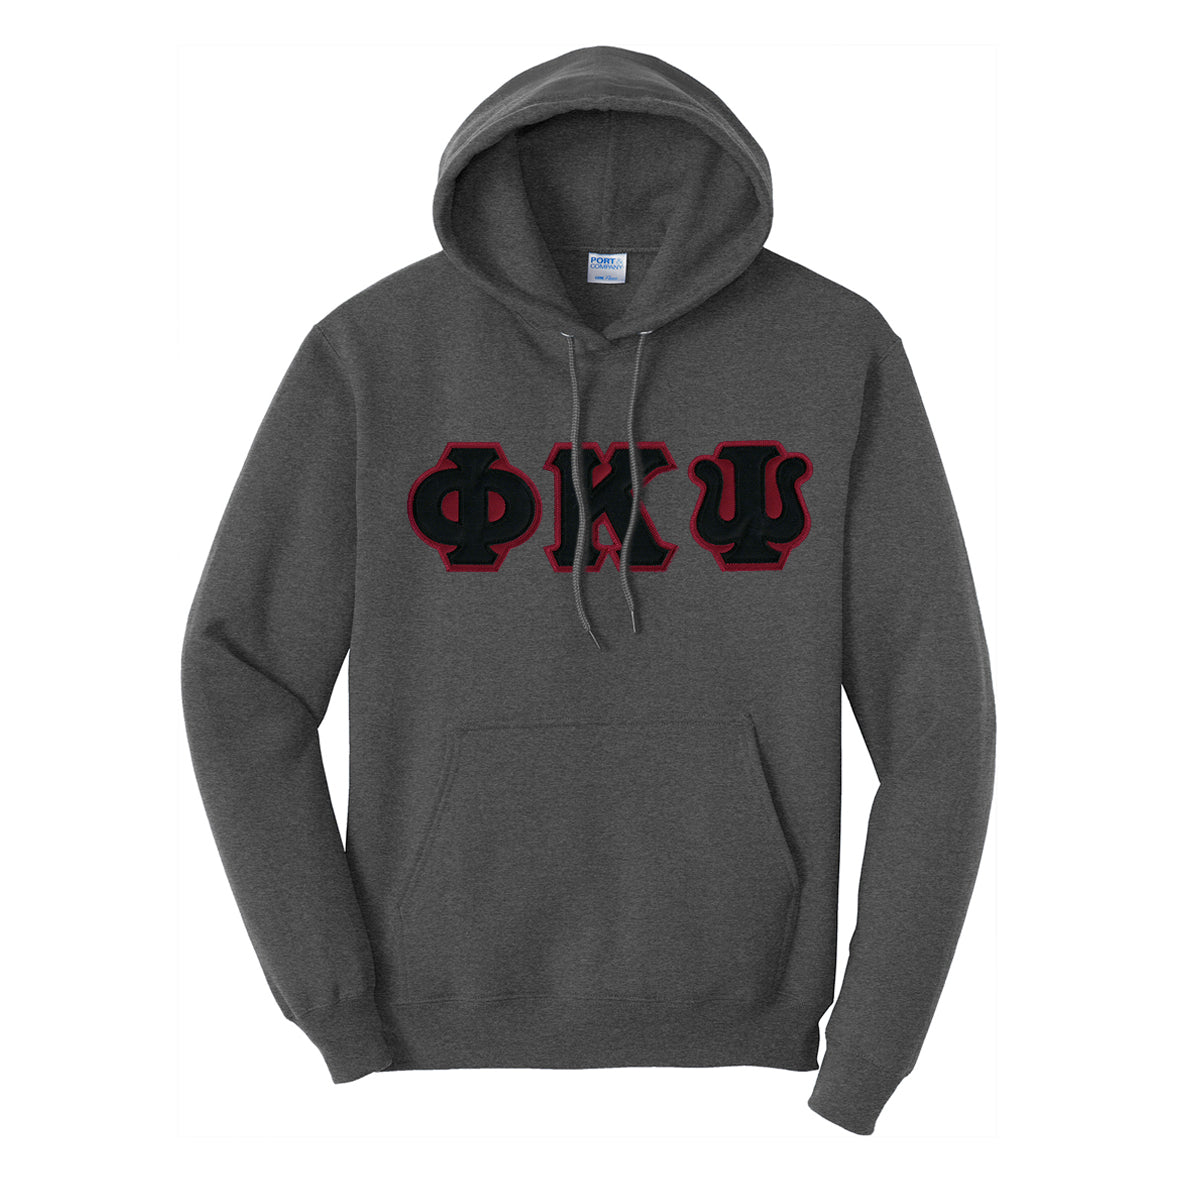 Phi Psi Dark Heather Hoodie with Sewn On Letters